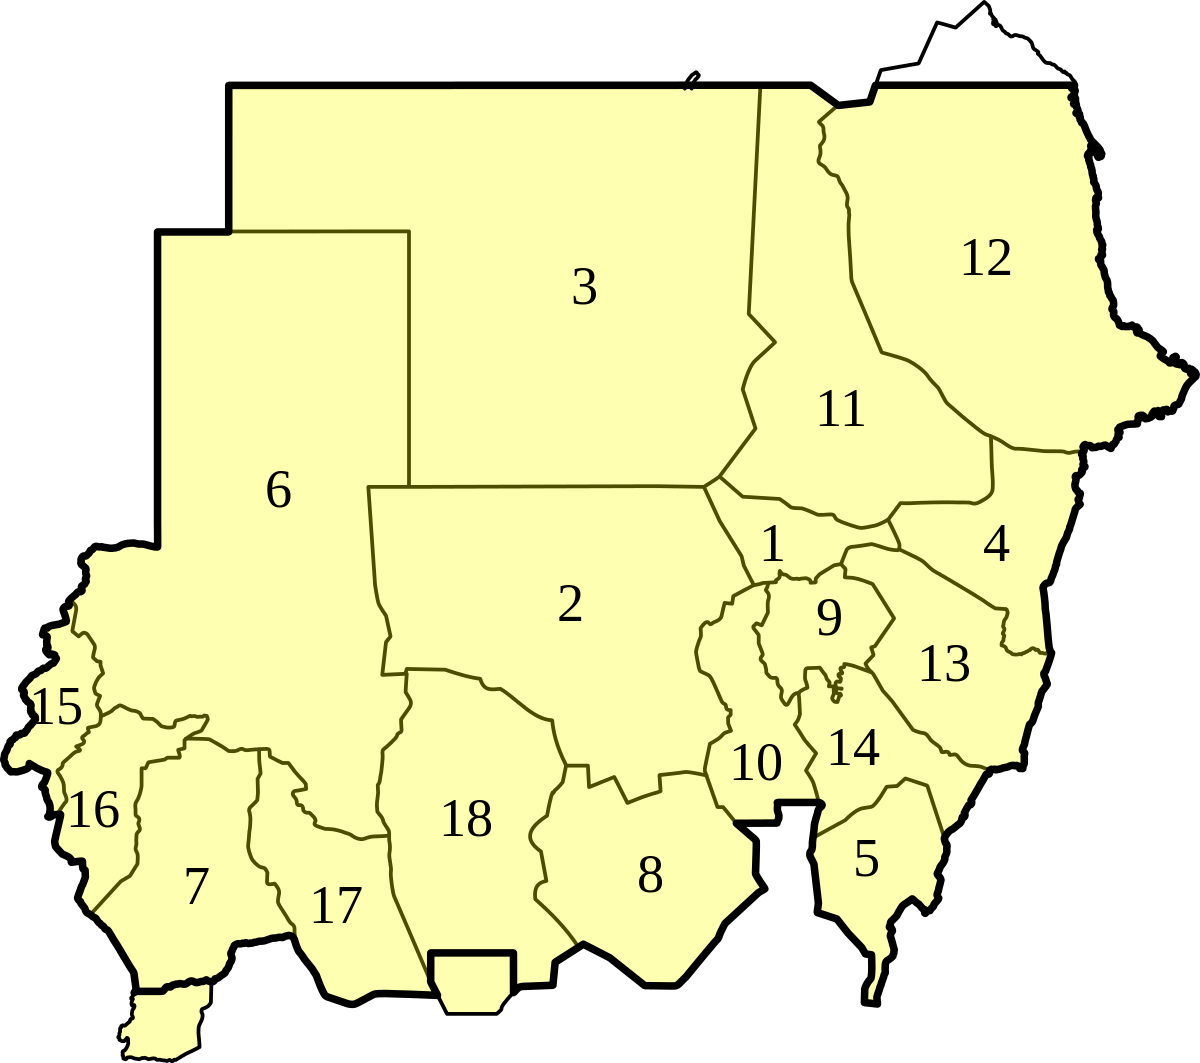 1200px-Northern_Sudan_states_numbered.svg